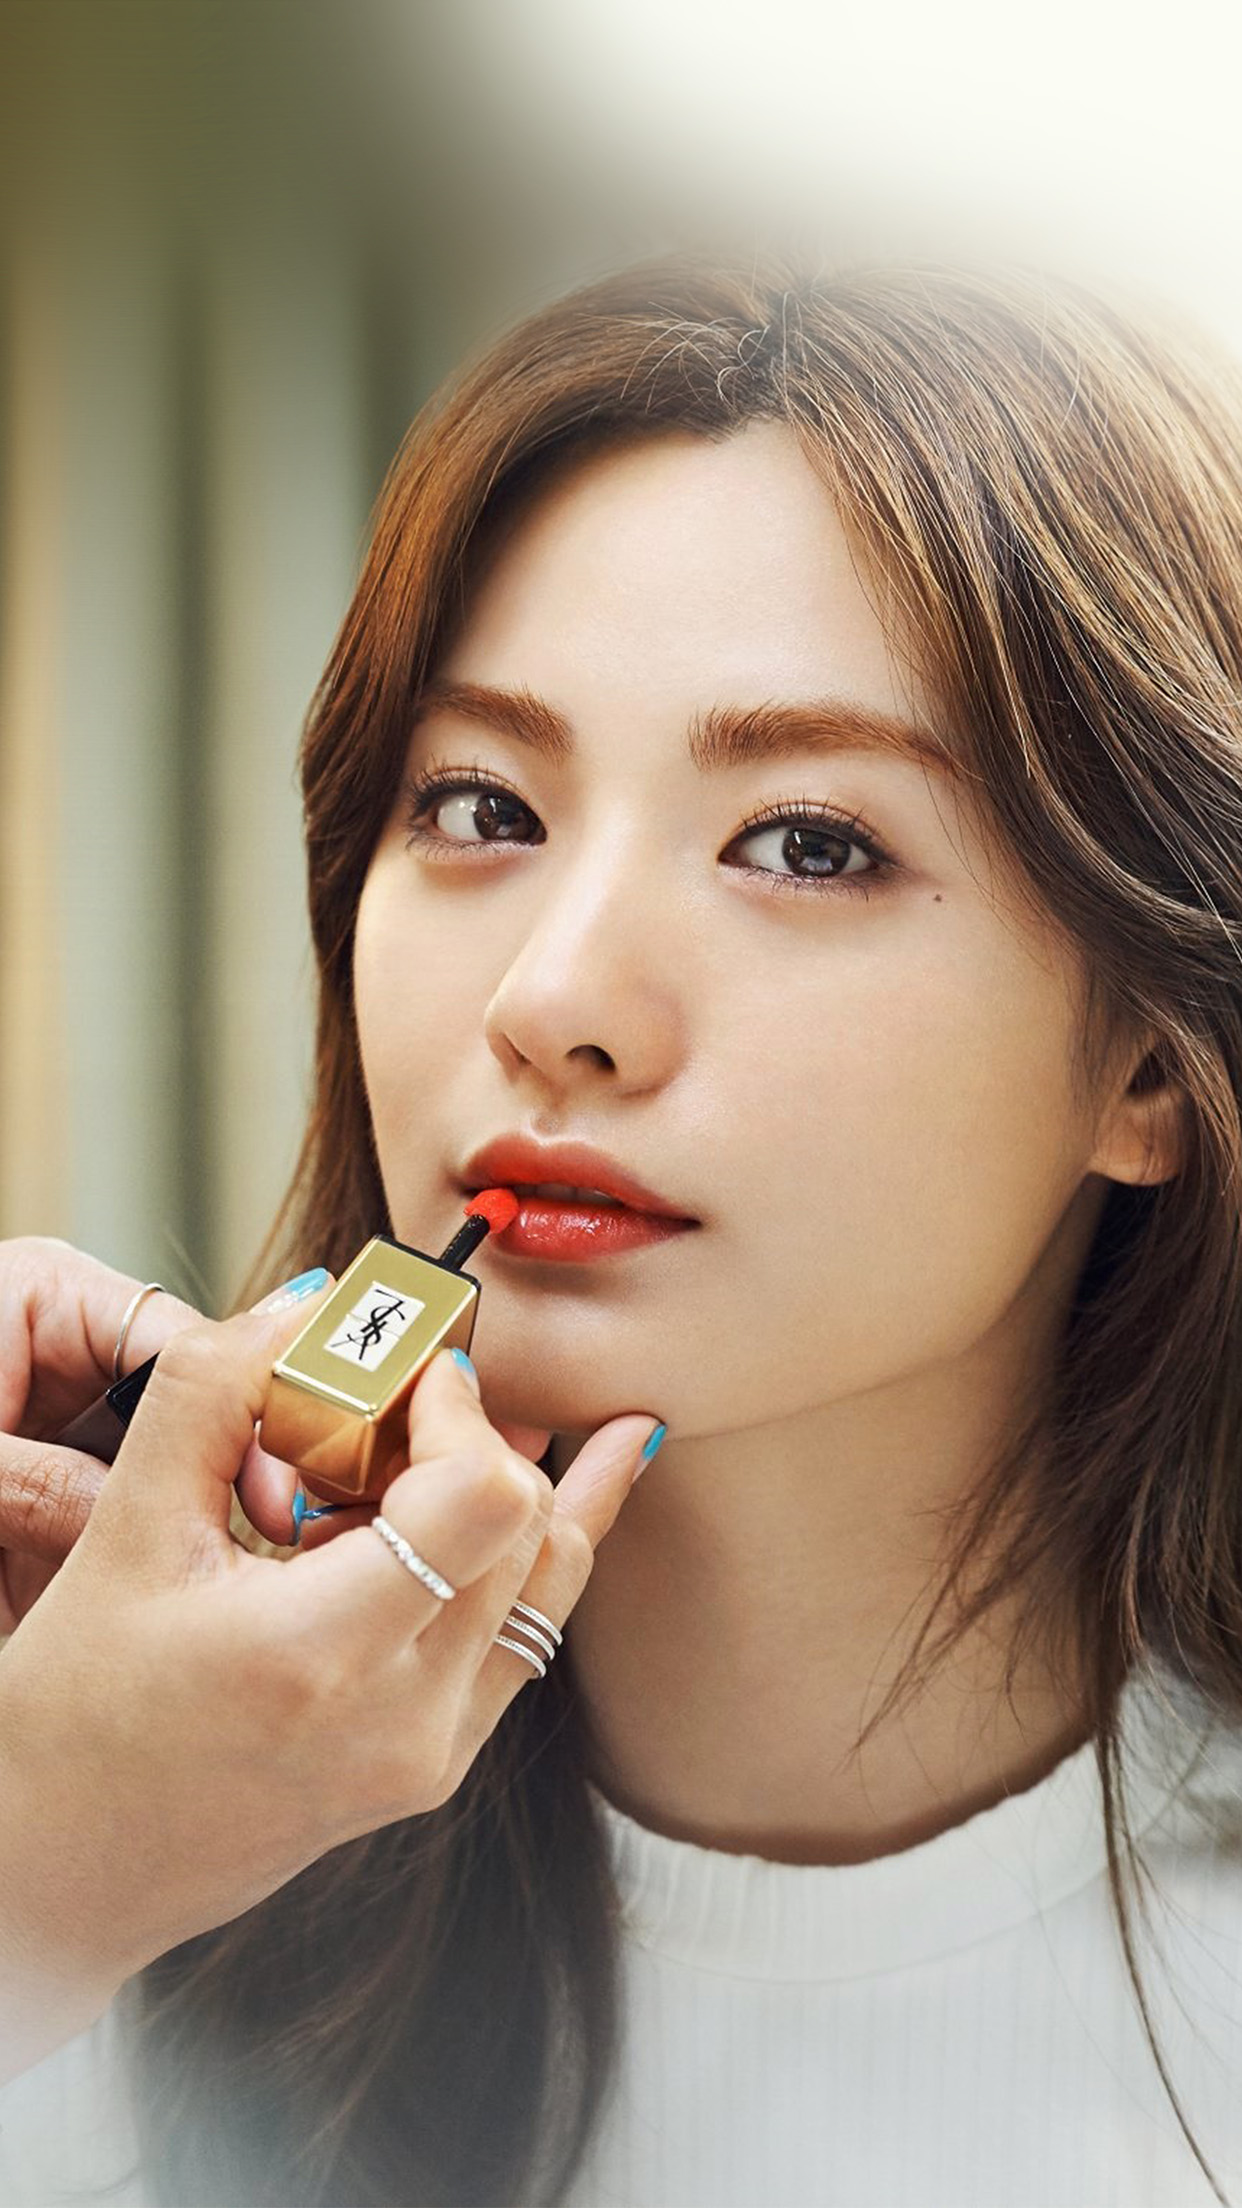 After Schools Nana looks stunning for InStyle Korea